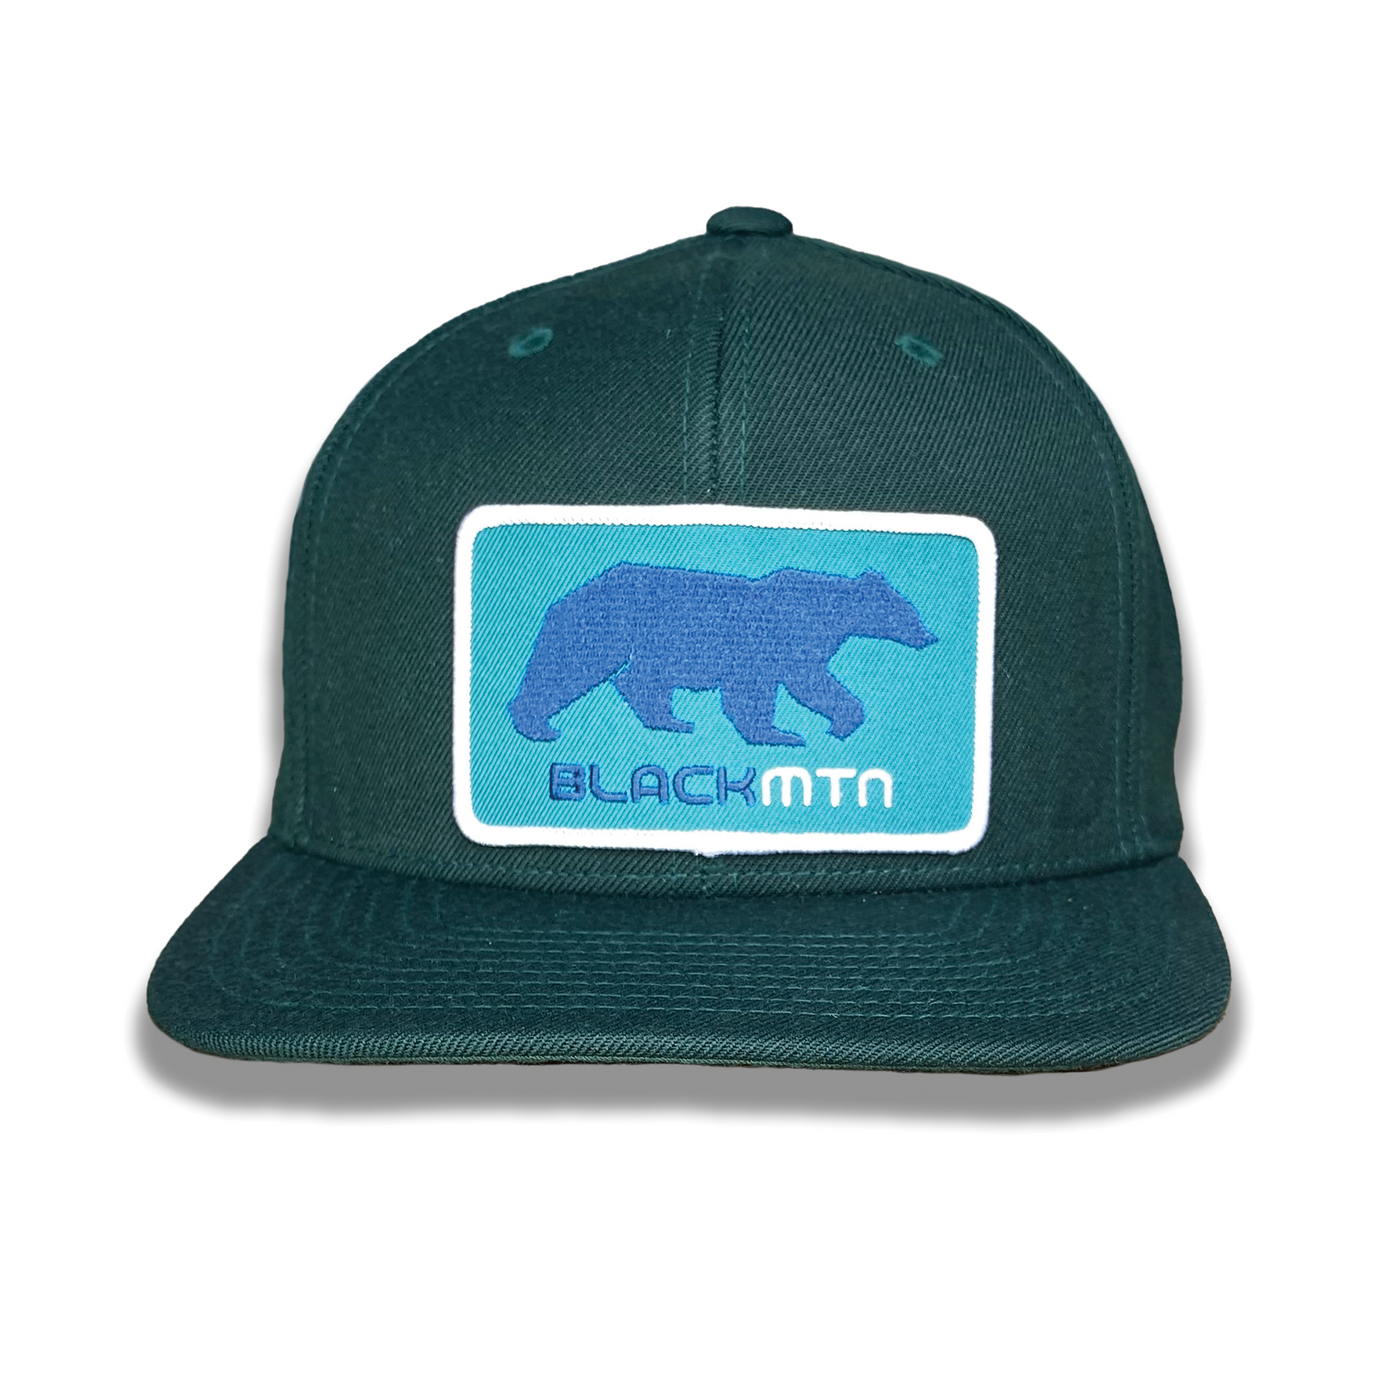 Green 6-Panel Flatbill Trucker Hat with Classic Teal Bear Patch